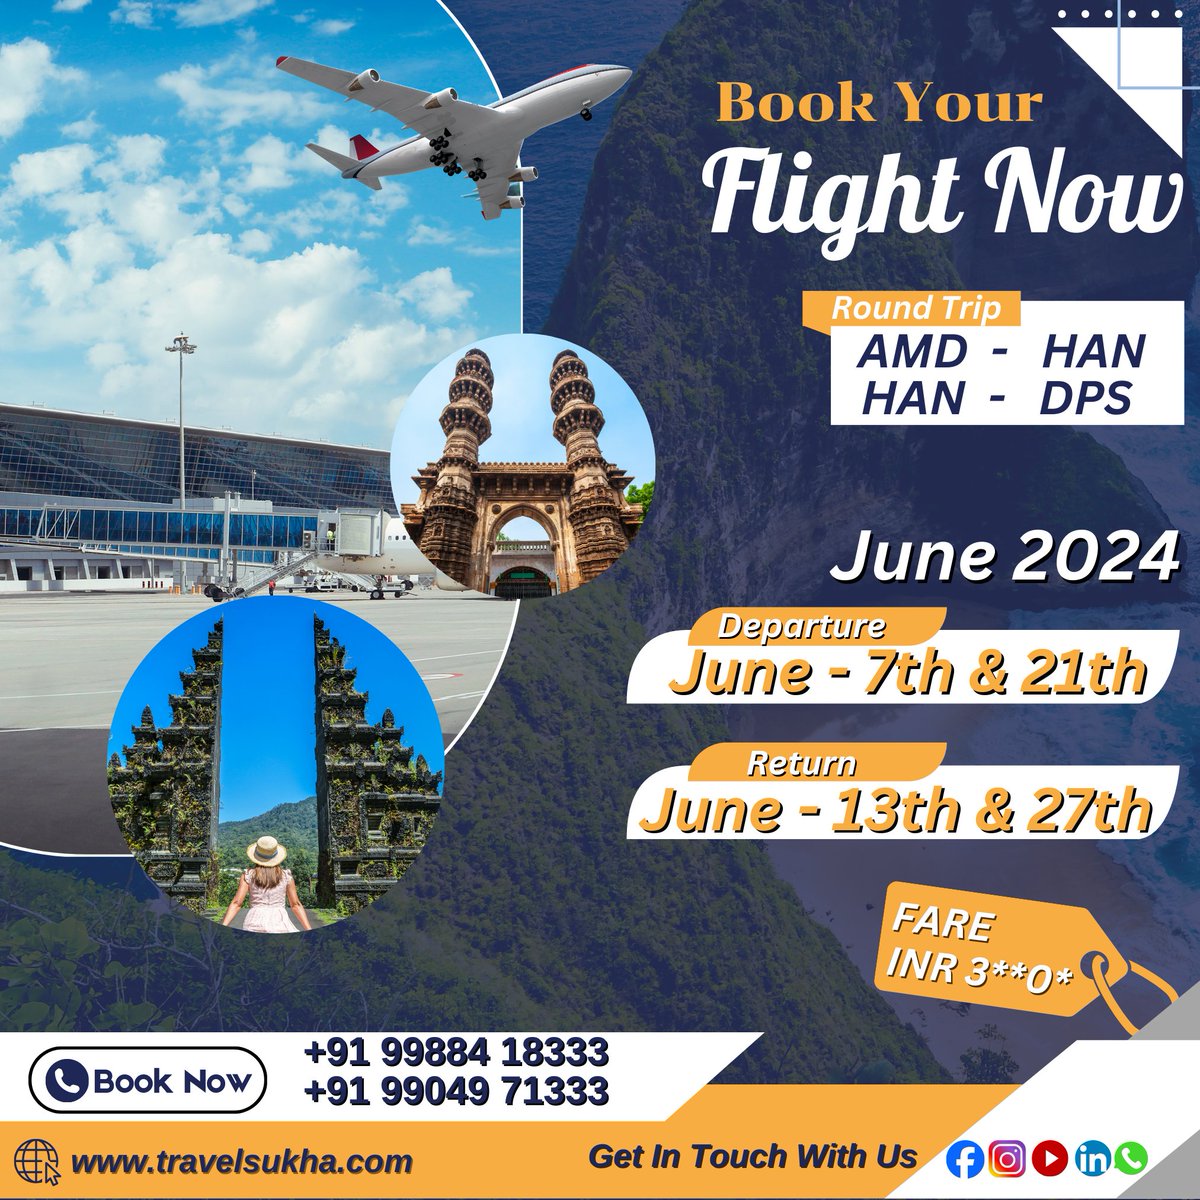 ✈️ Dreaming of Bali? ✨ Book your flight tickets from Ahmedabad to Bali now at unbeatable prices!
Hurry, limited seats available for our June departure series! #TravelSukha #AhmedabadToBali #FlightDeals #JuneTravel #Wanderlust #travelvlog #traveldiaries #flightfare